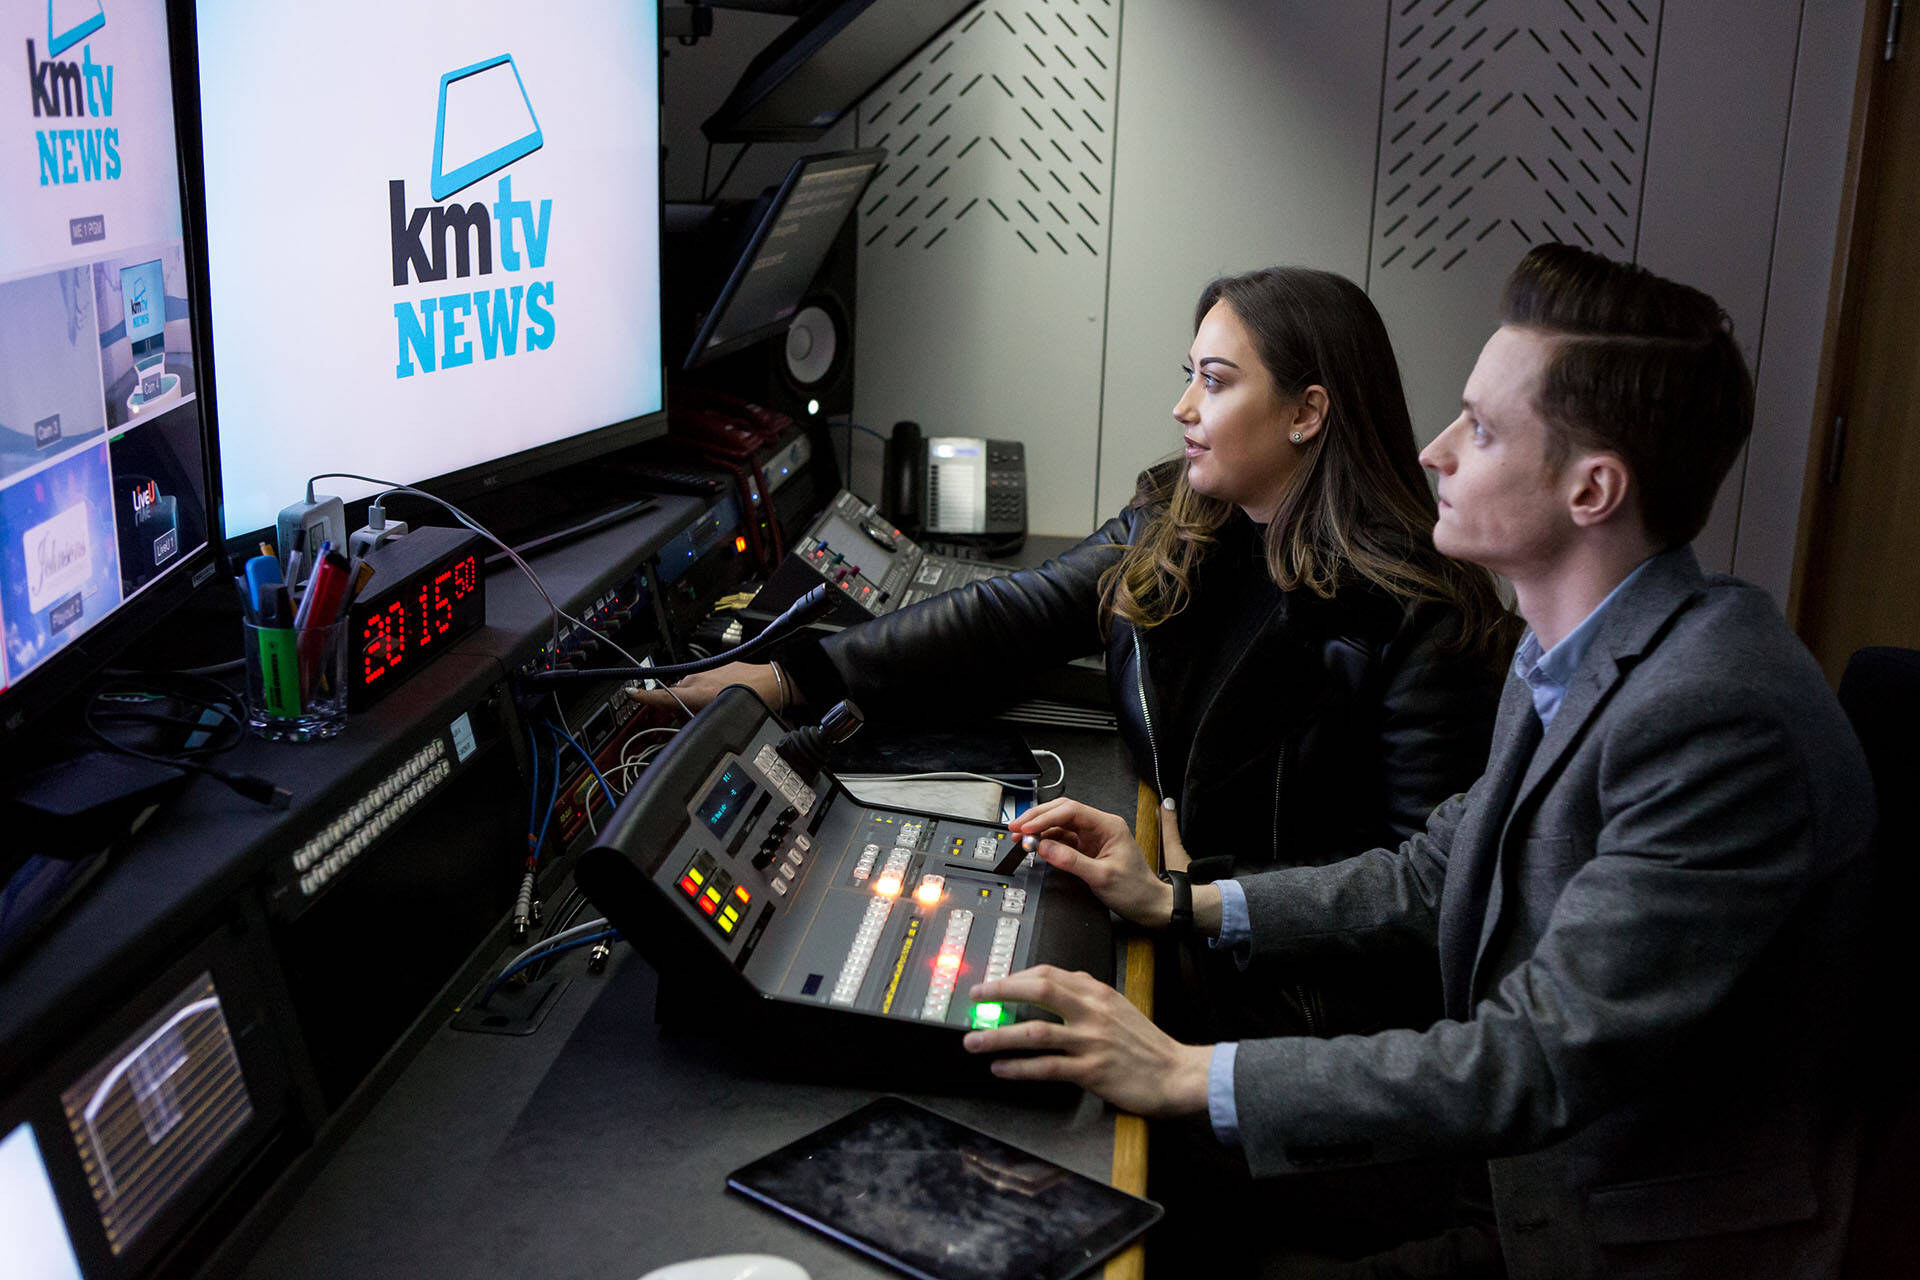 Man and woman at a news desk with KMTV news on the main screen